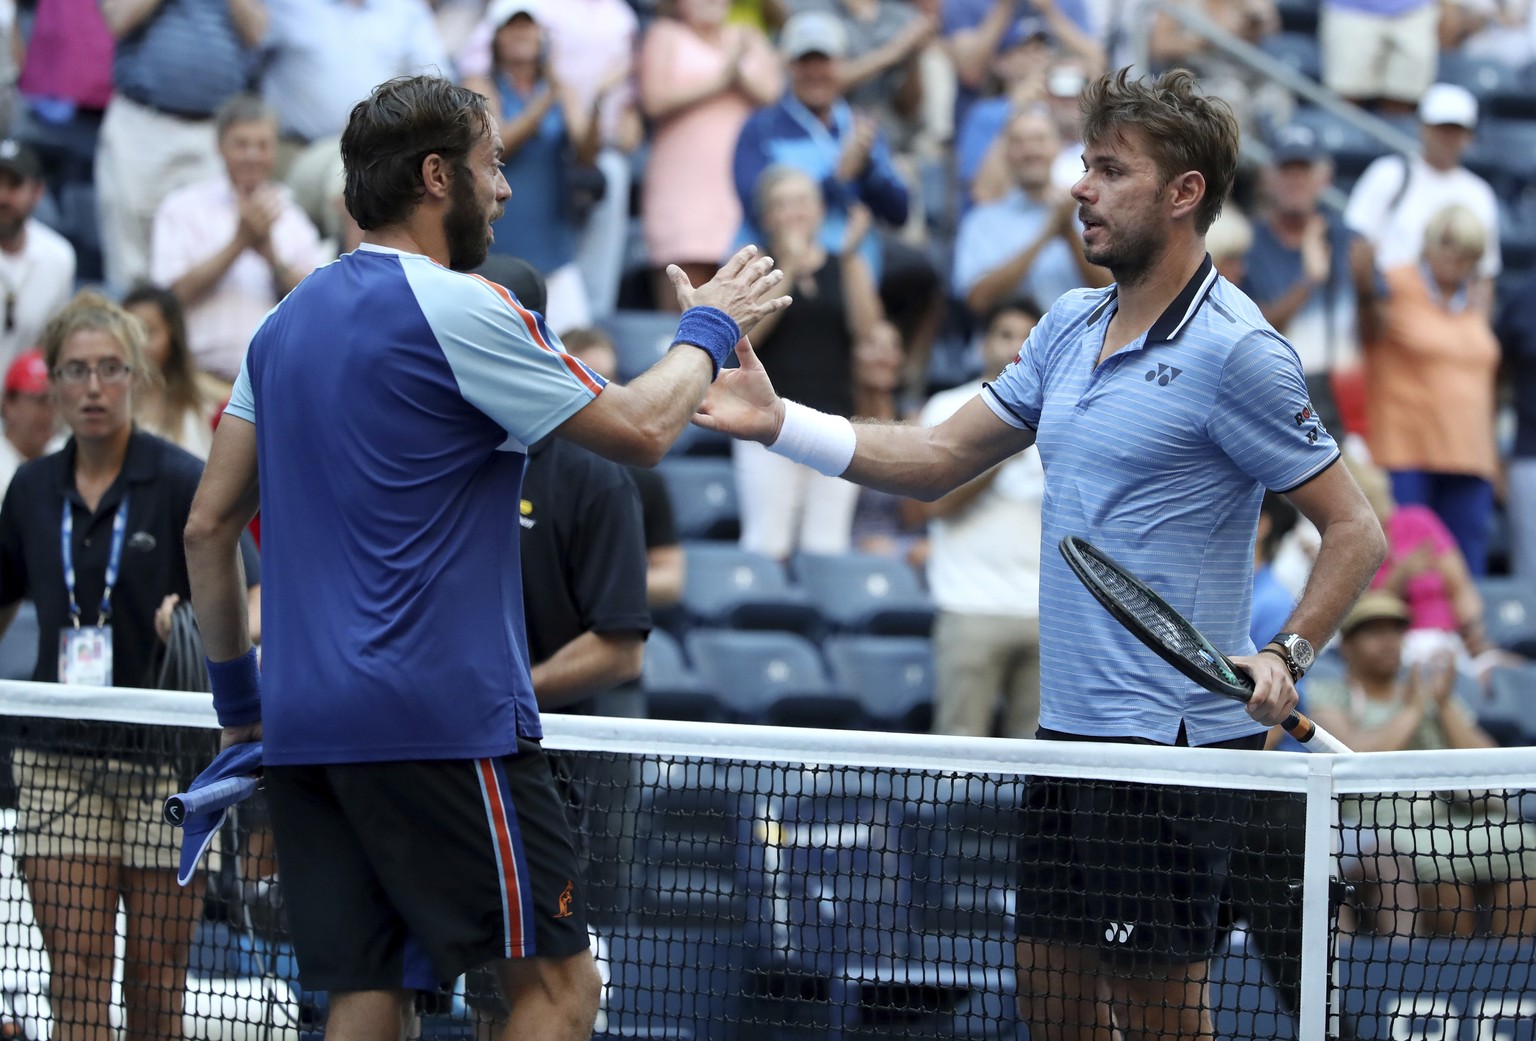 Stan Wawrinka, of Switzerland, shakes hands with Paolo Lorenzi, of Italy, after winning their third-round match of the US Open tennis championships Friday, Aug. 30, 2019, in New York. (AP Photo/Michae ...